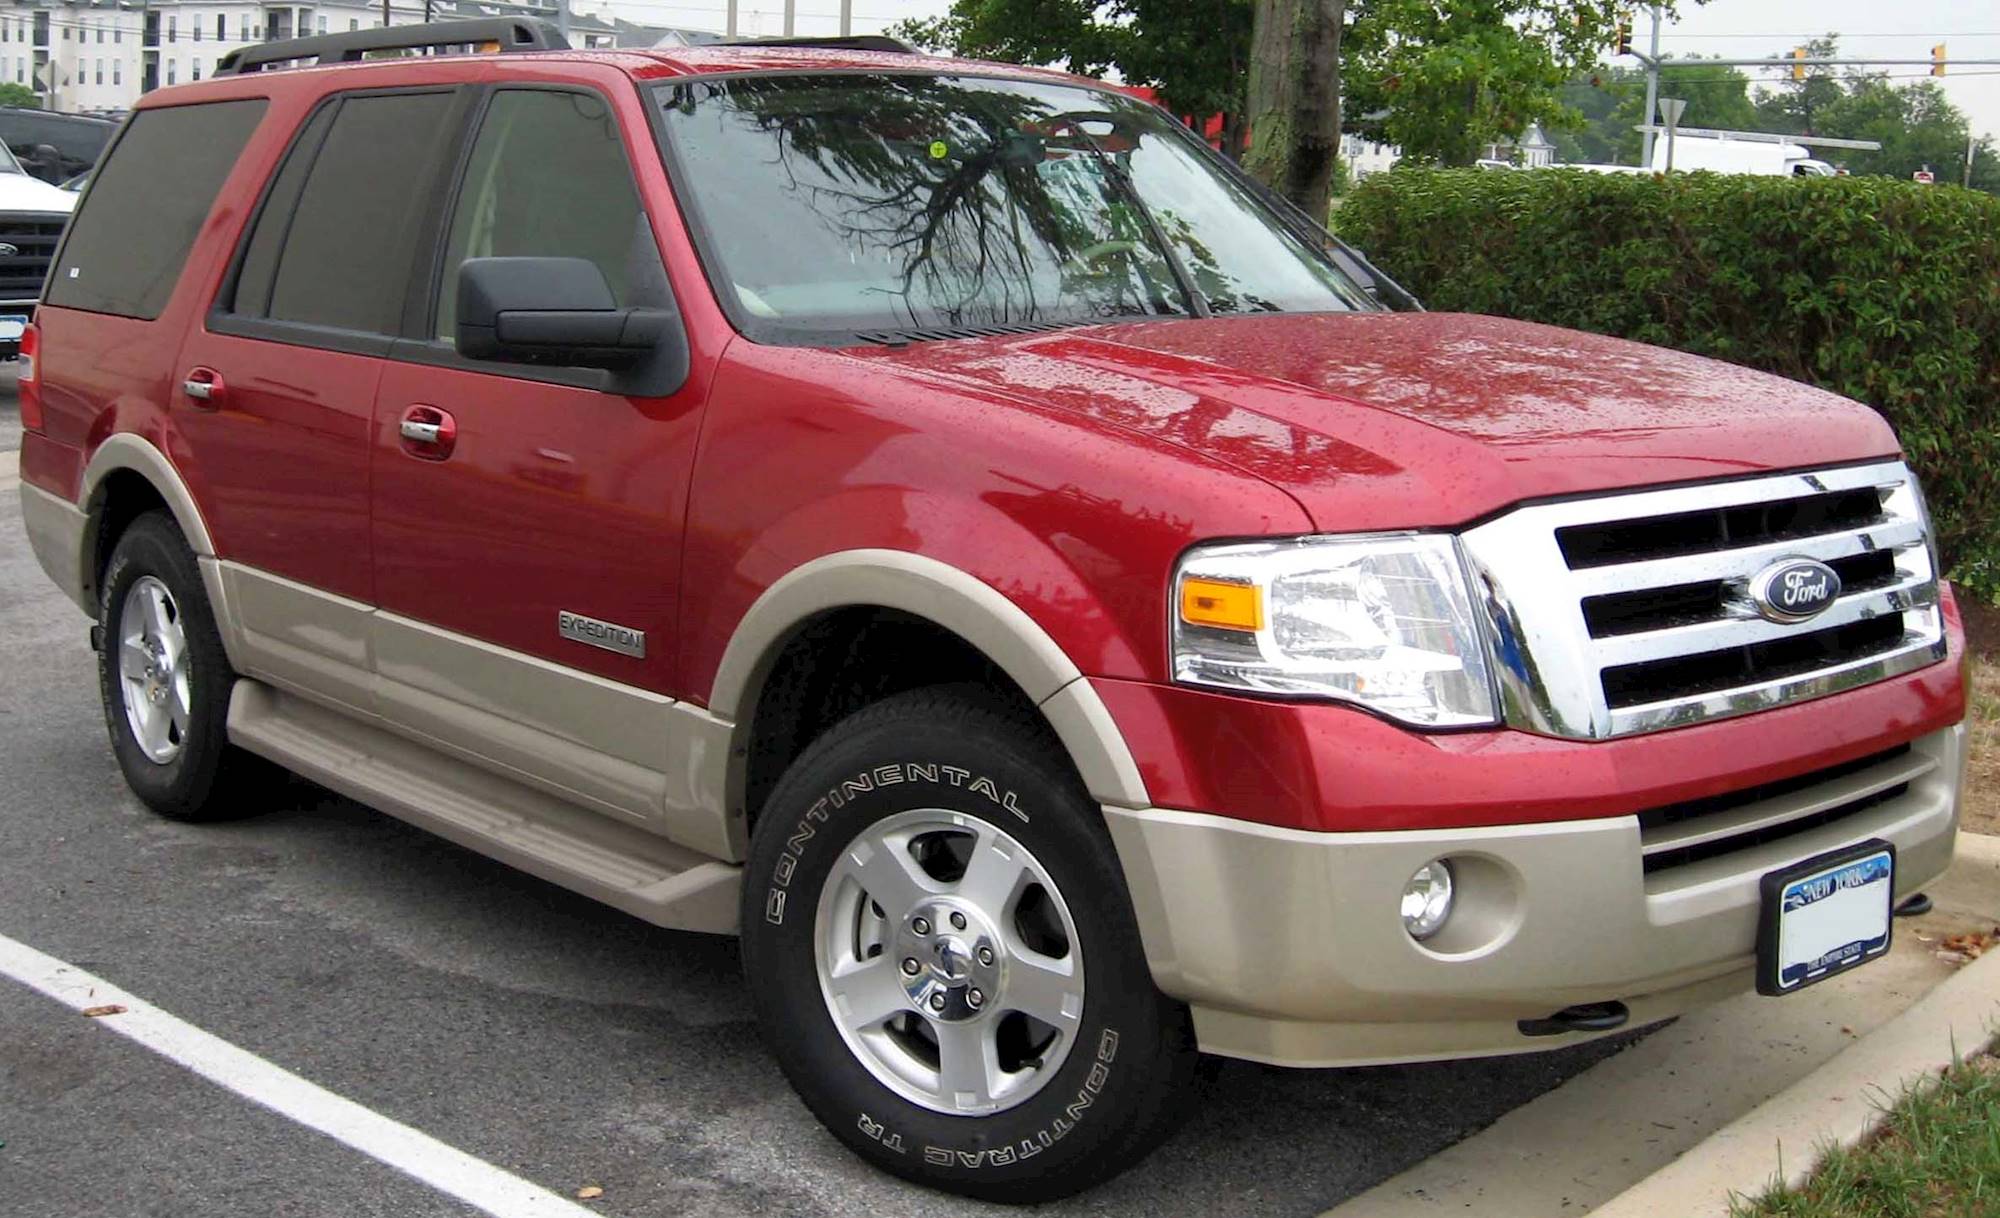 2006 Ford Expedition Limited - 4dr SUV 5.4L V8 4x4 auto